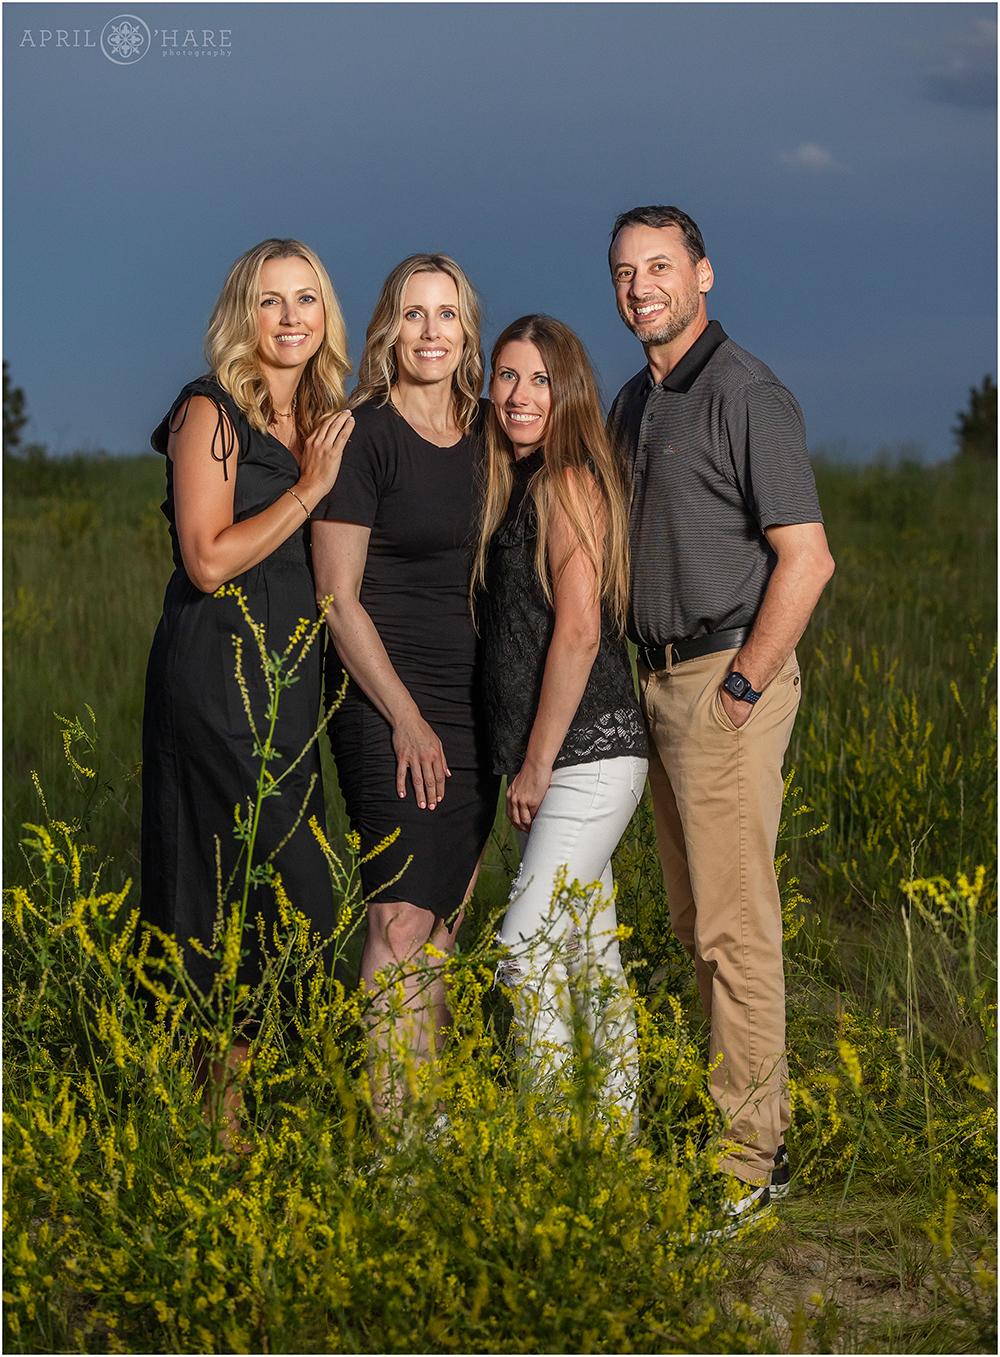 Four adult siblings get a photo together at sunset in a field in Aurora Colorado